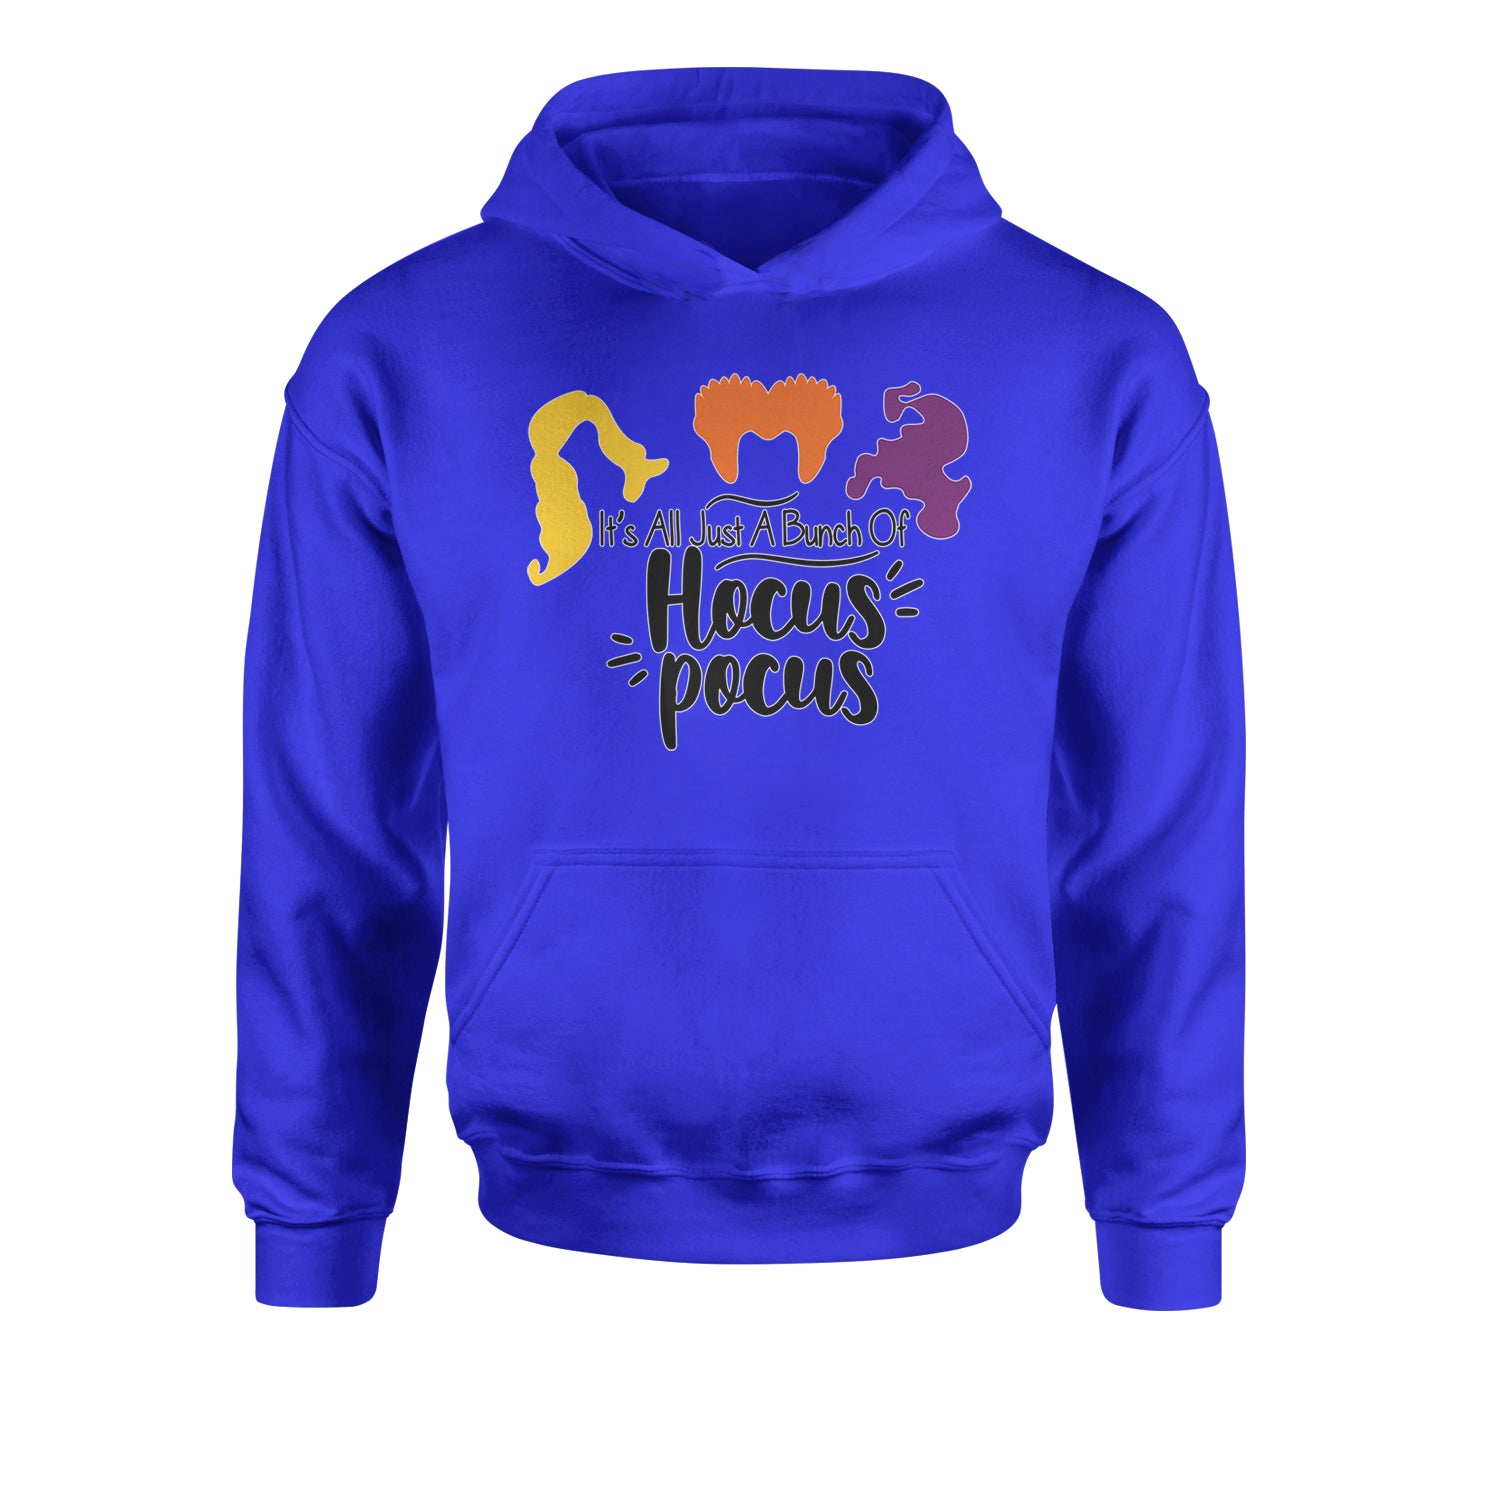 It's Just A Bunch Of Hocus Pocus Youth-Sized Hoodie descendants, enchanted, eve, hallows, hocus, or, pocus, sanderson, sisters, treat, trick, witches by Expression Tees